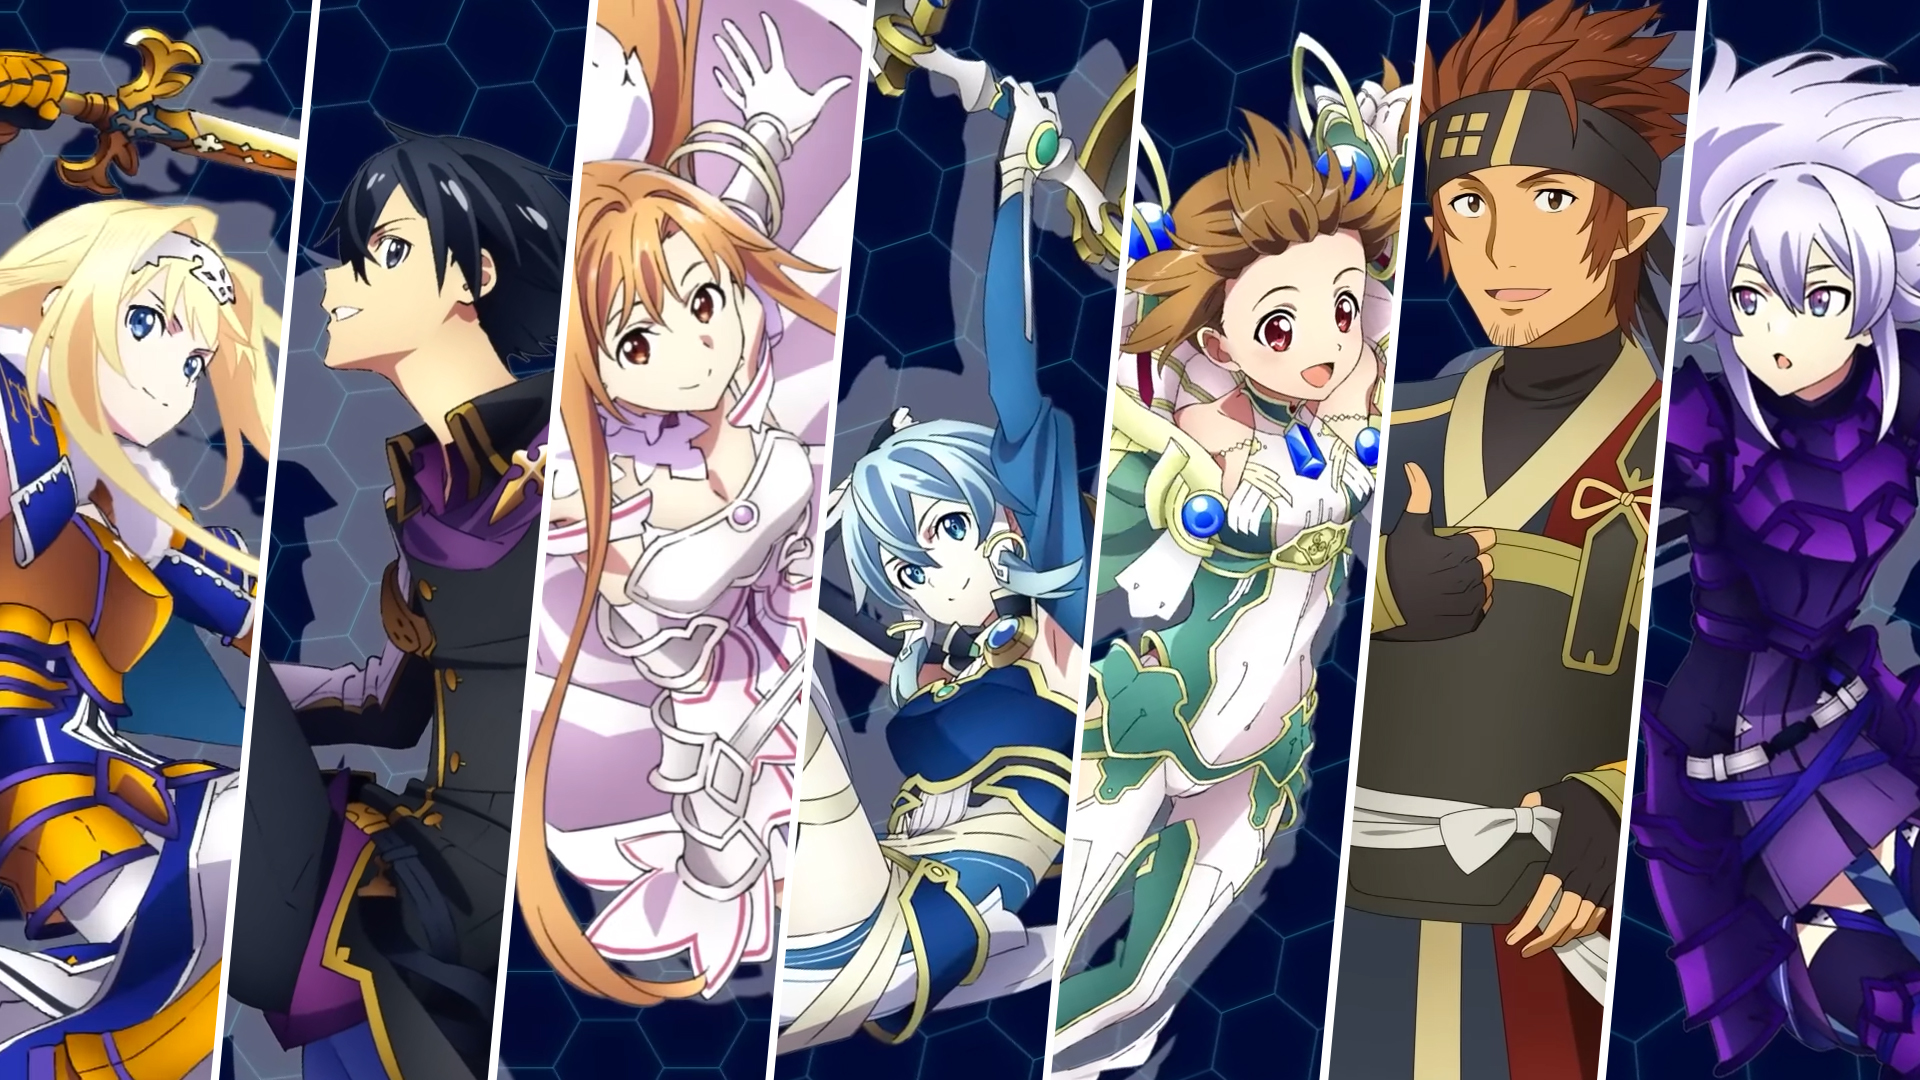 Pre-Orders Now Available for SWORD ART ONLINE Last Recollection